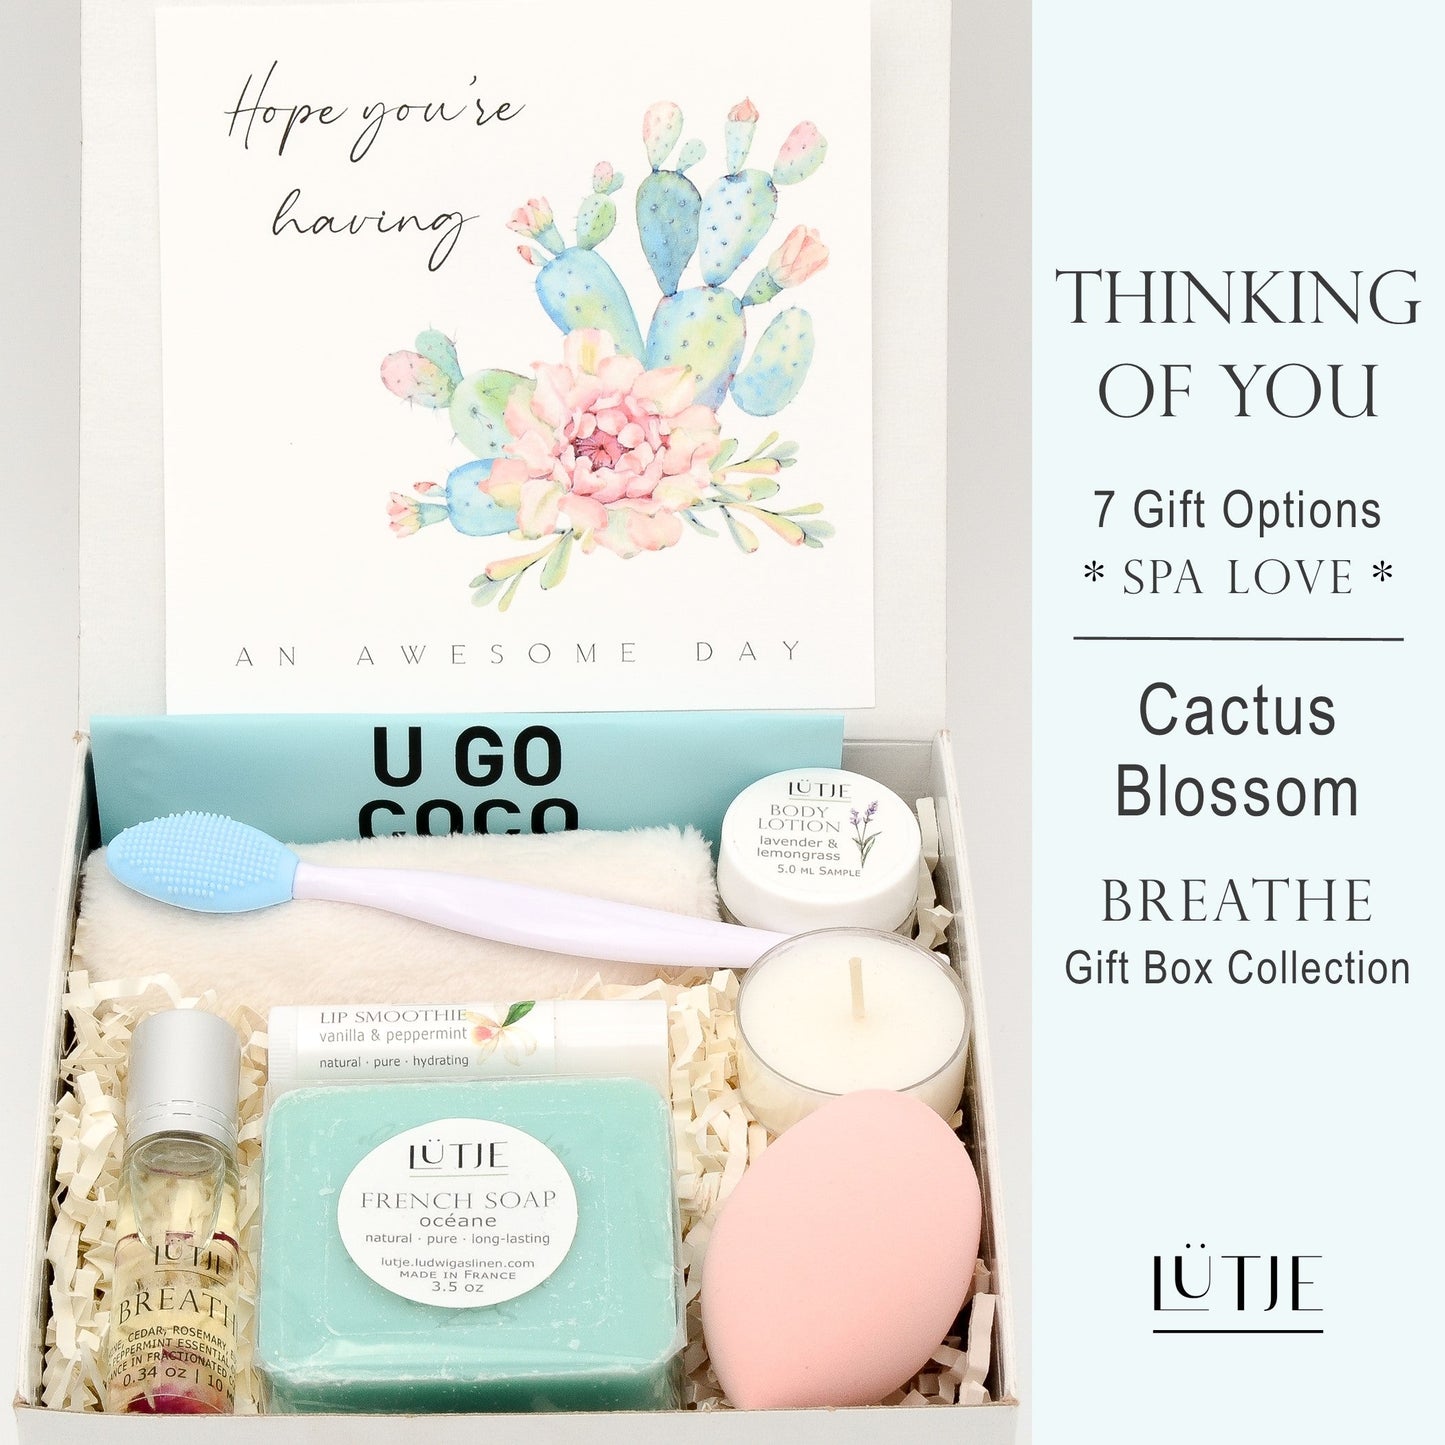 Gift Boxes for women, wife, daughter, BFF, sister, mom, or grandma, includes Cactus Blossom hand lotion spray and body lotion, essential oil, lip balm, soothing muscle balm, Lavender & Chamomile room & linen spray, French soap, French bath salts, hydrating face mask, other bath, spa and self-care items, and 18K gold-plated necklace with engraved heart.